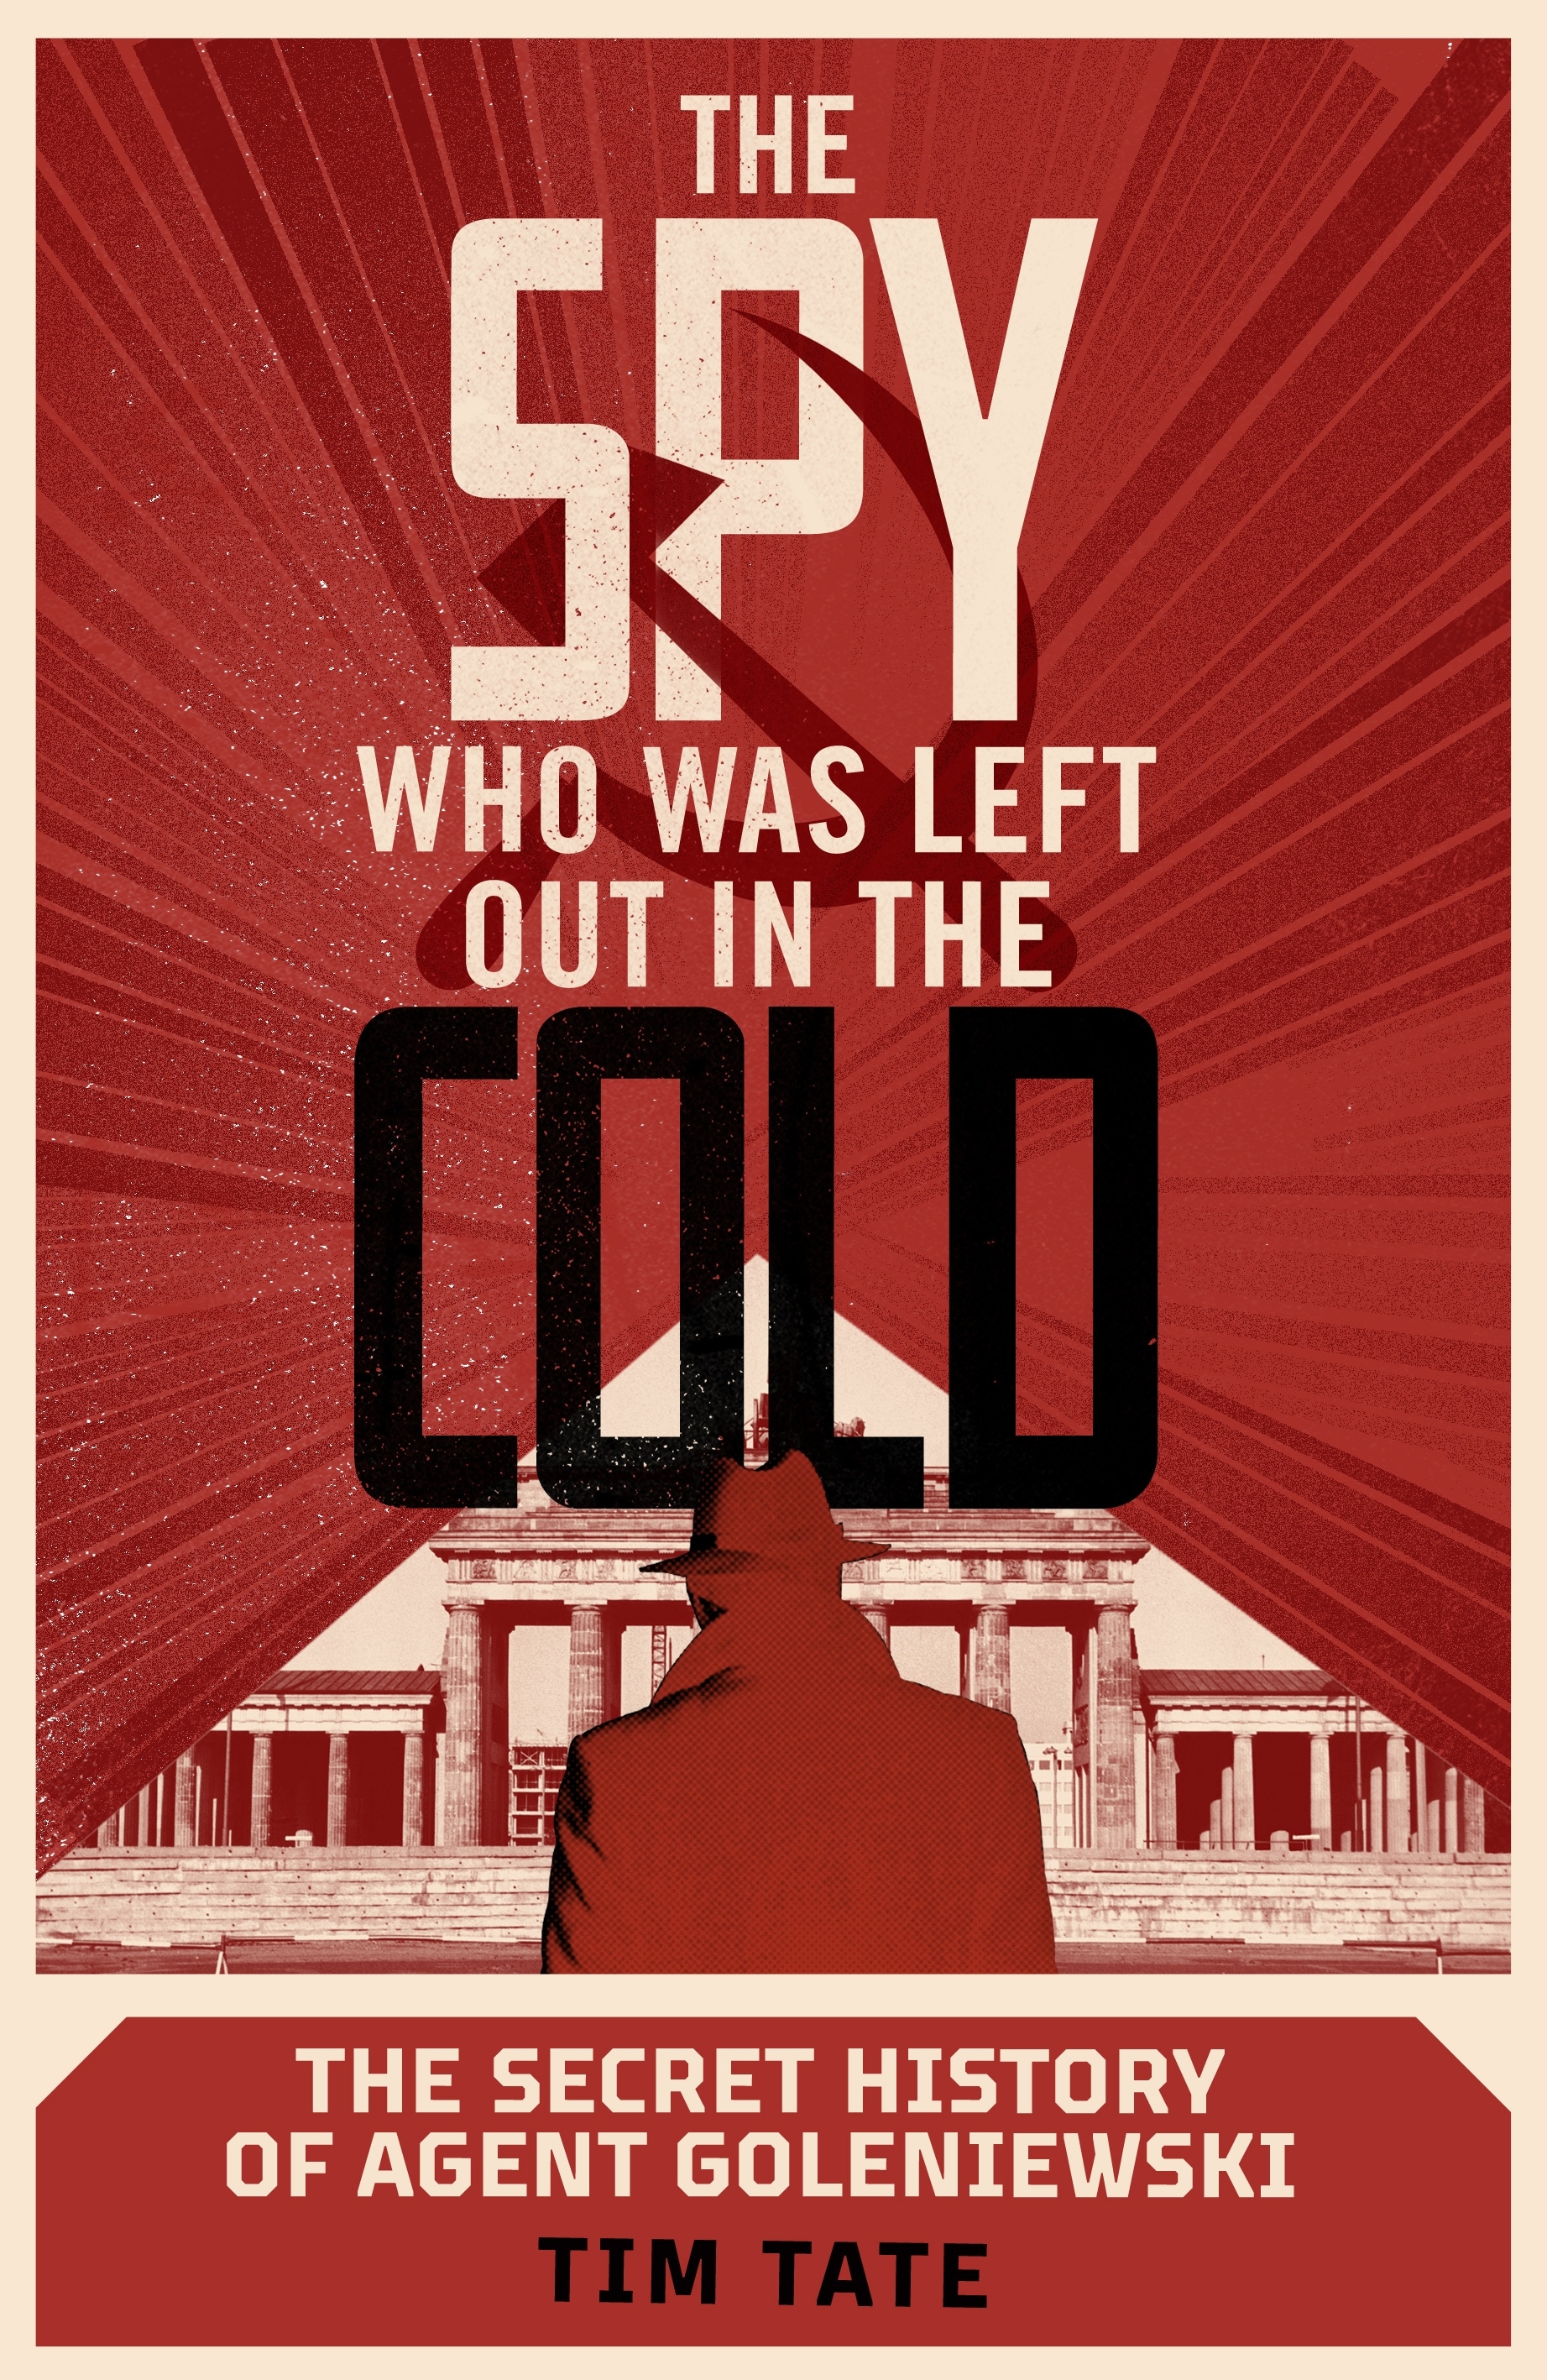 Book “The Spy who was left out in the Cold” by Tim Tate — May 27, 2021